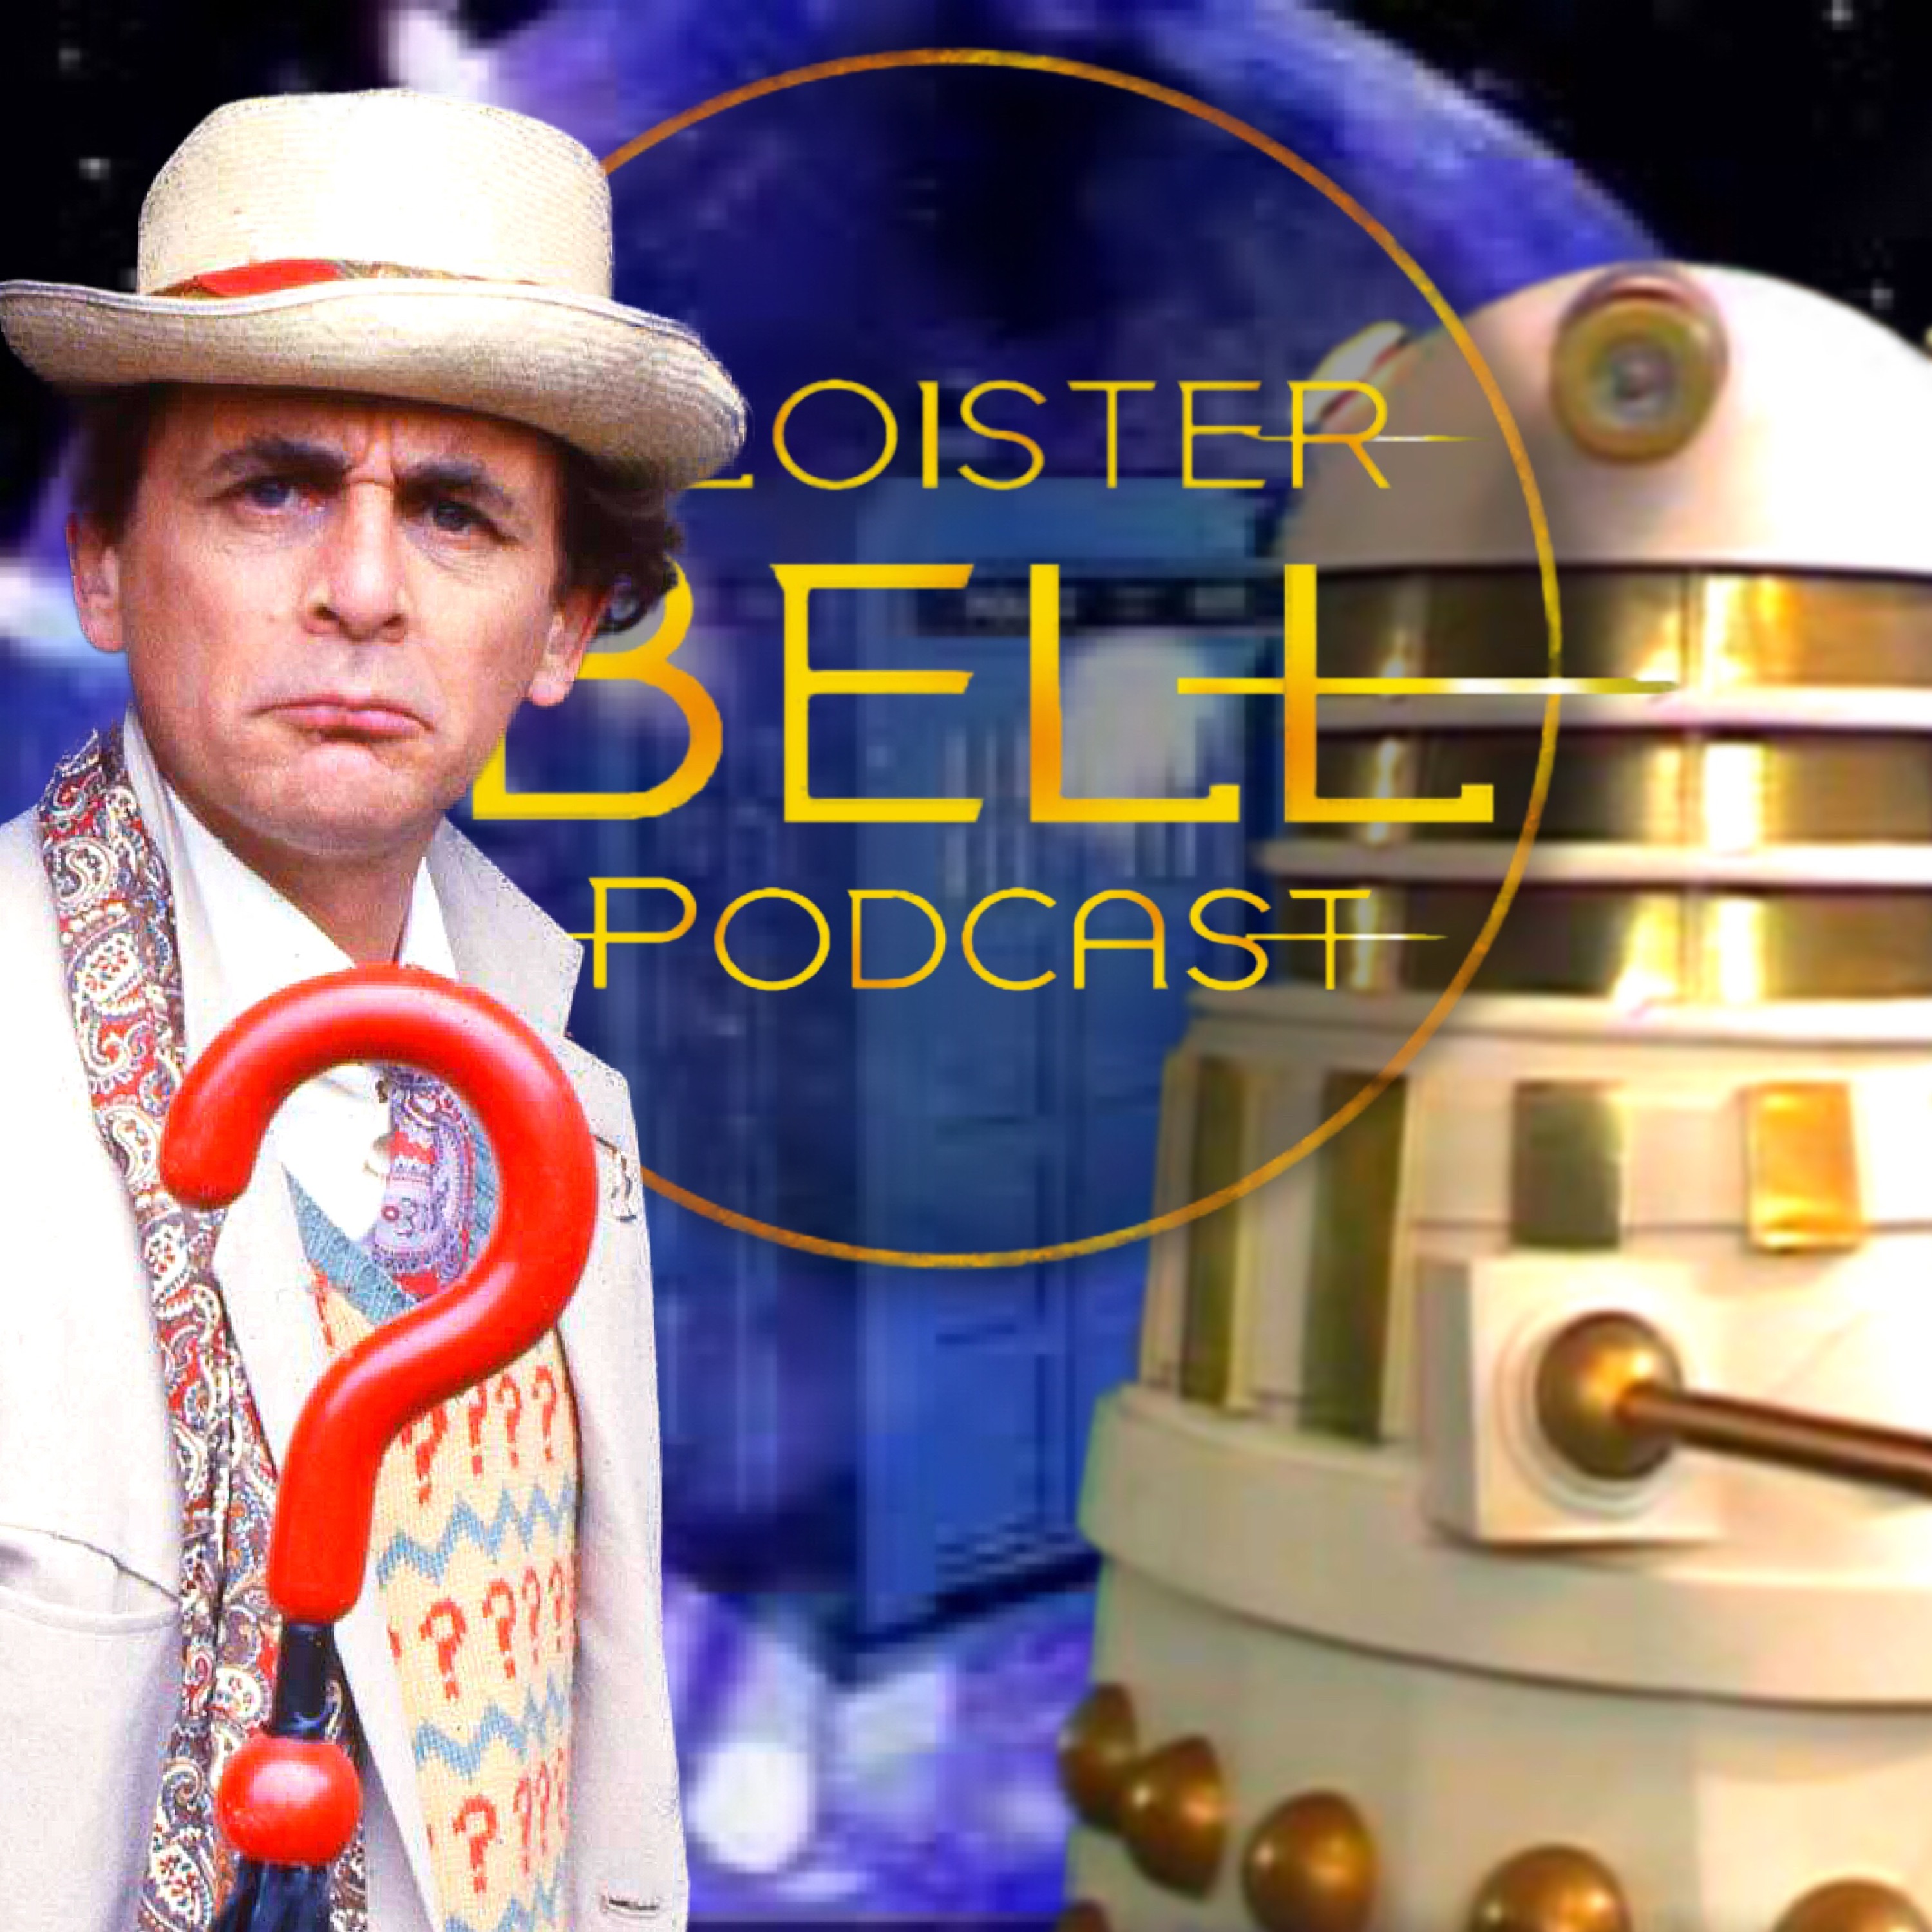 Cloister Bell 034: Remembrance of the Daleks